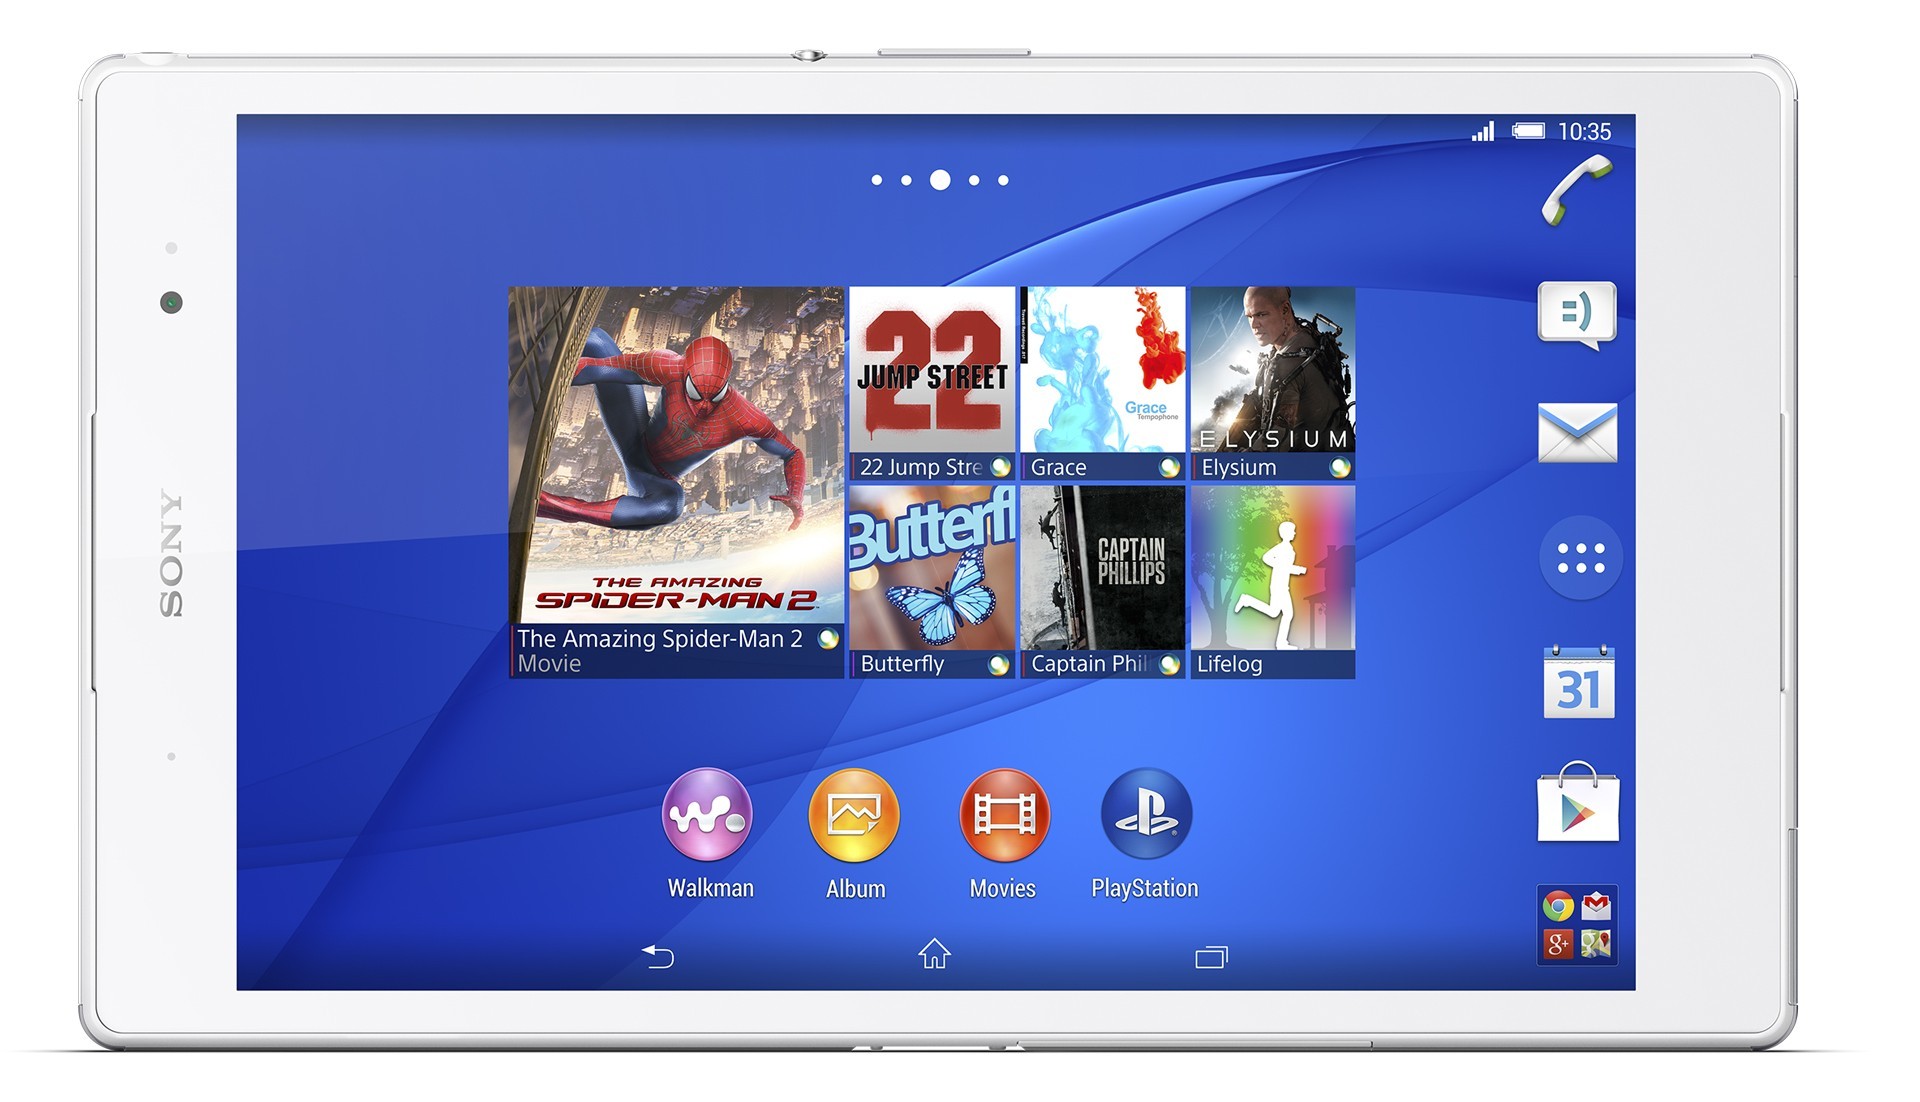 Sony Xperia Z4 Tablet Ultra Specs Leak: 12.9-Inch Display, Snapdragon 810 and 6GB of RAM